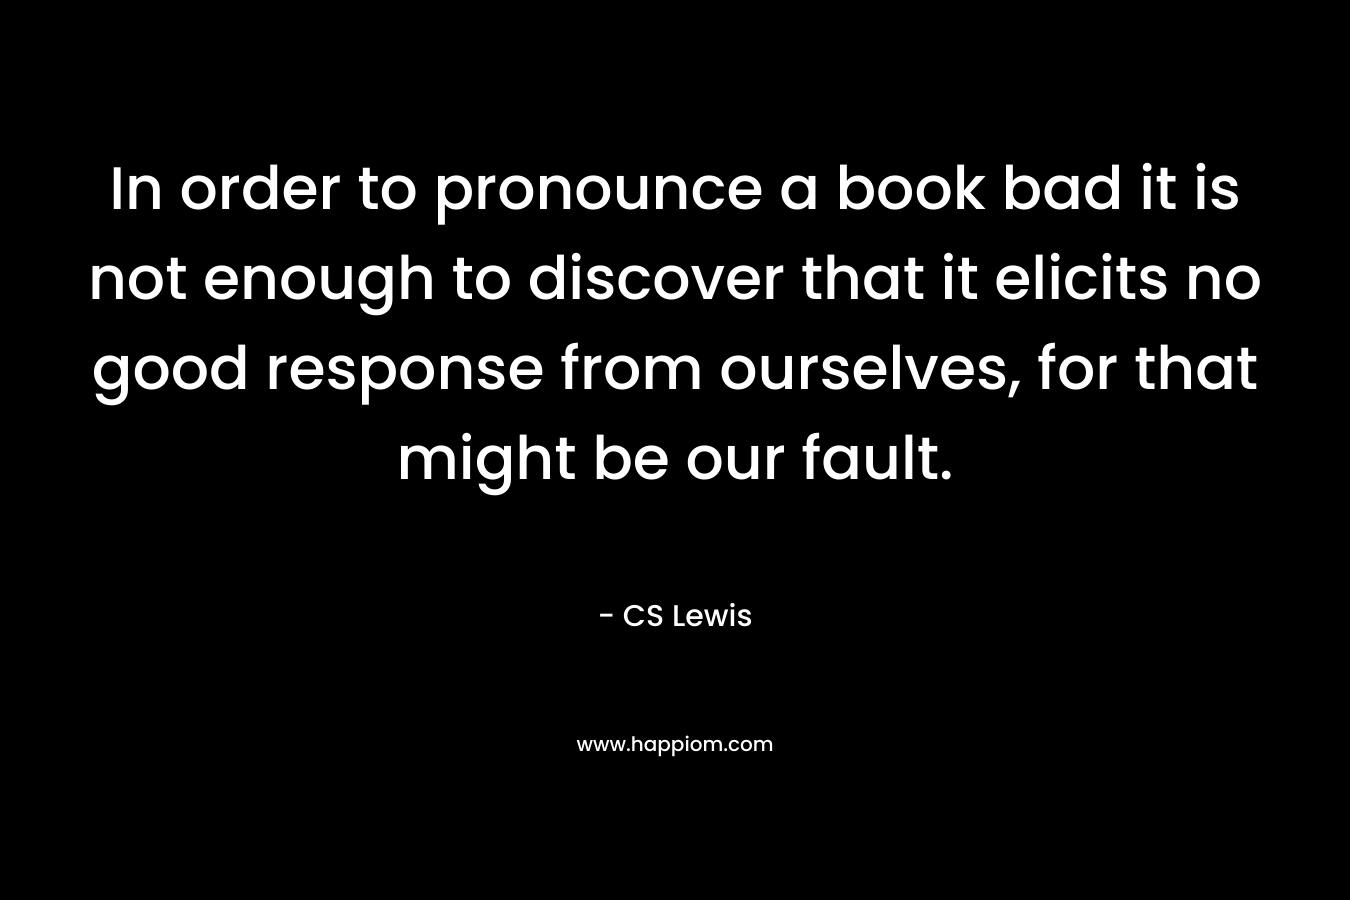 In order to pronounce a book bad it is not enough to discover that it elicits no good response from ourselves, for that might be our fault.